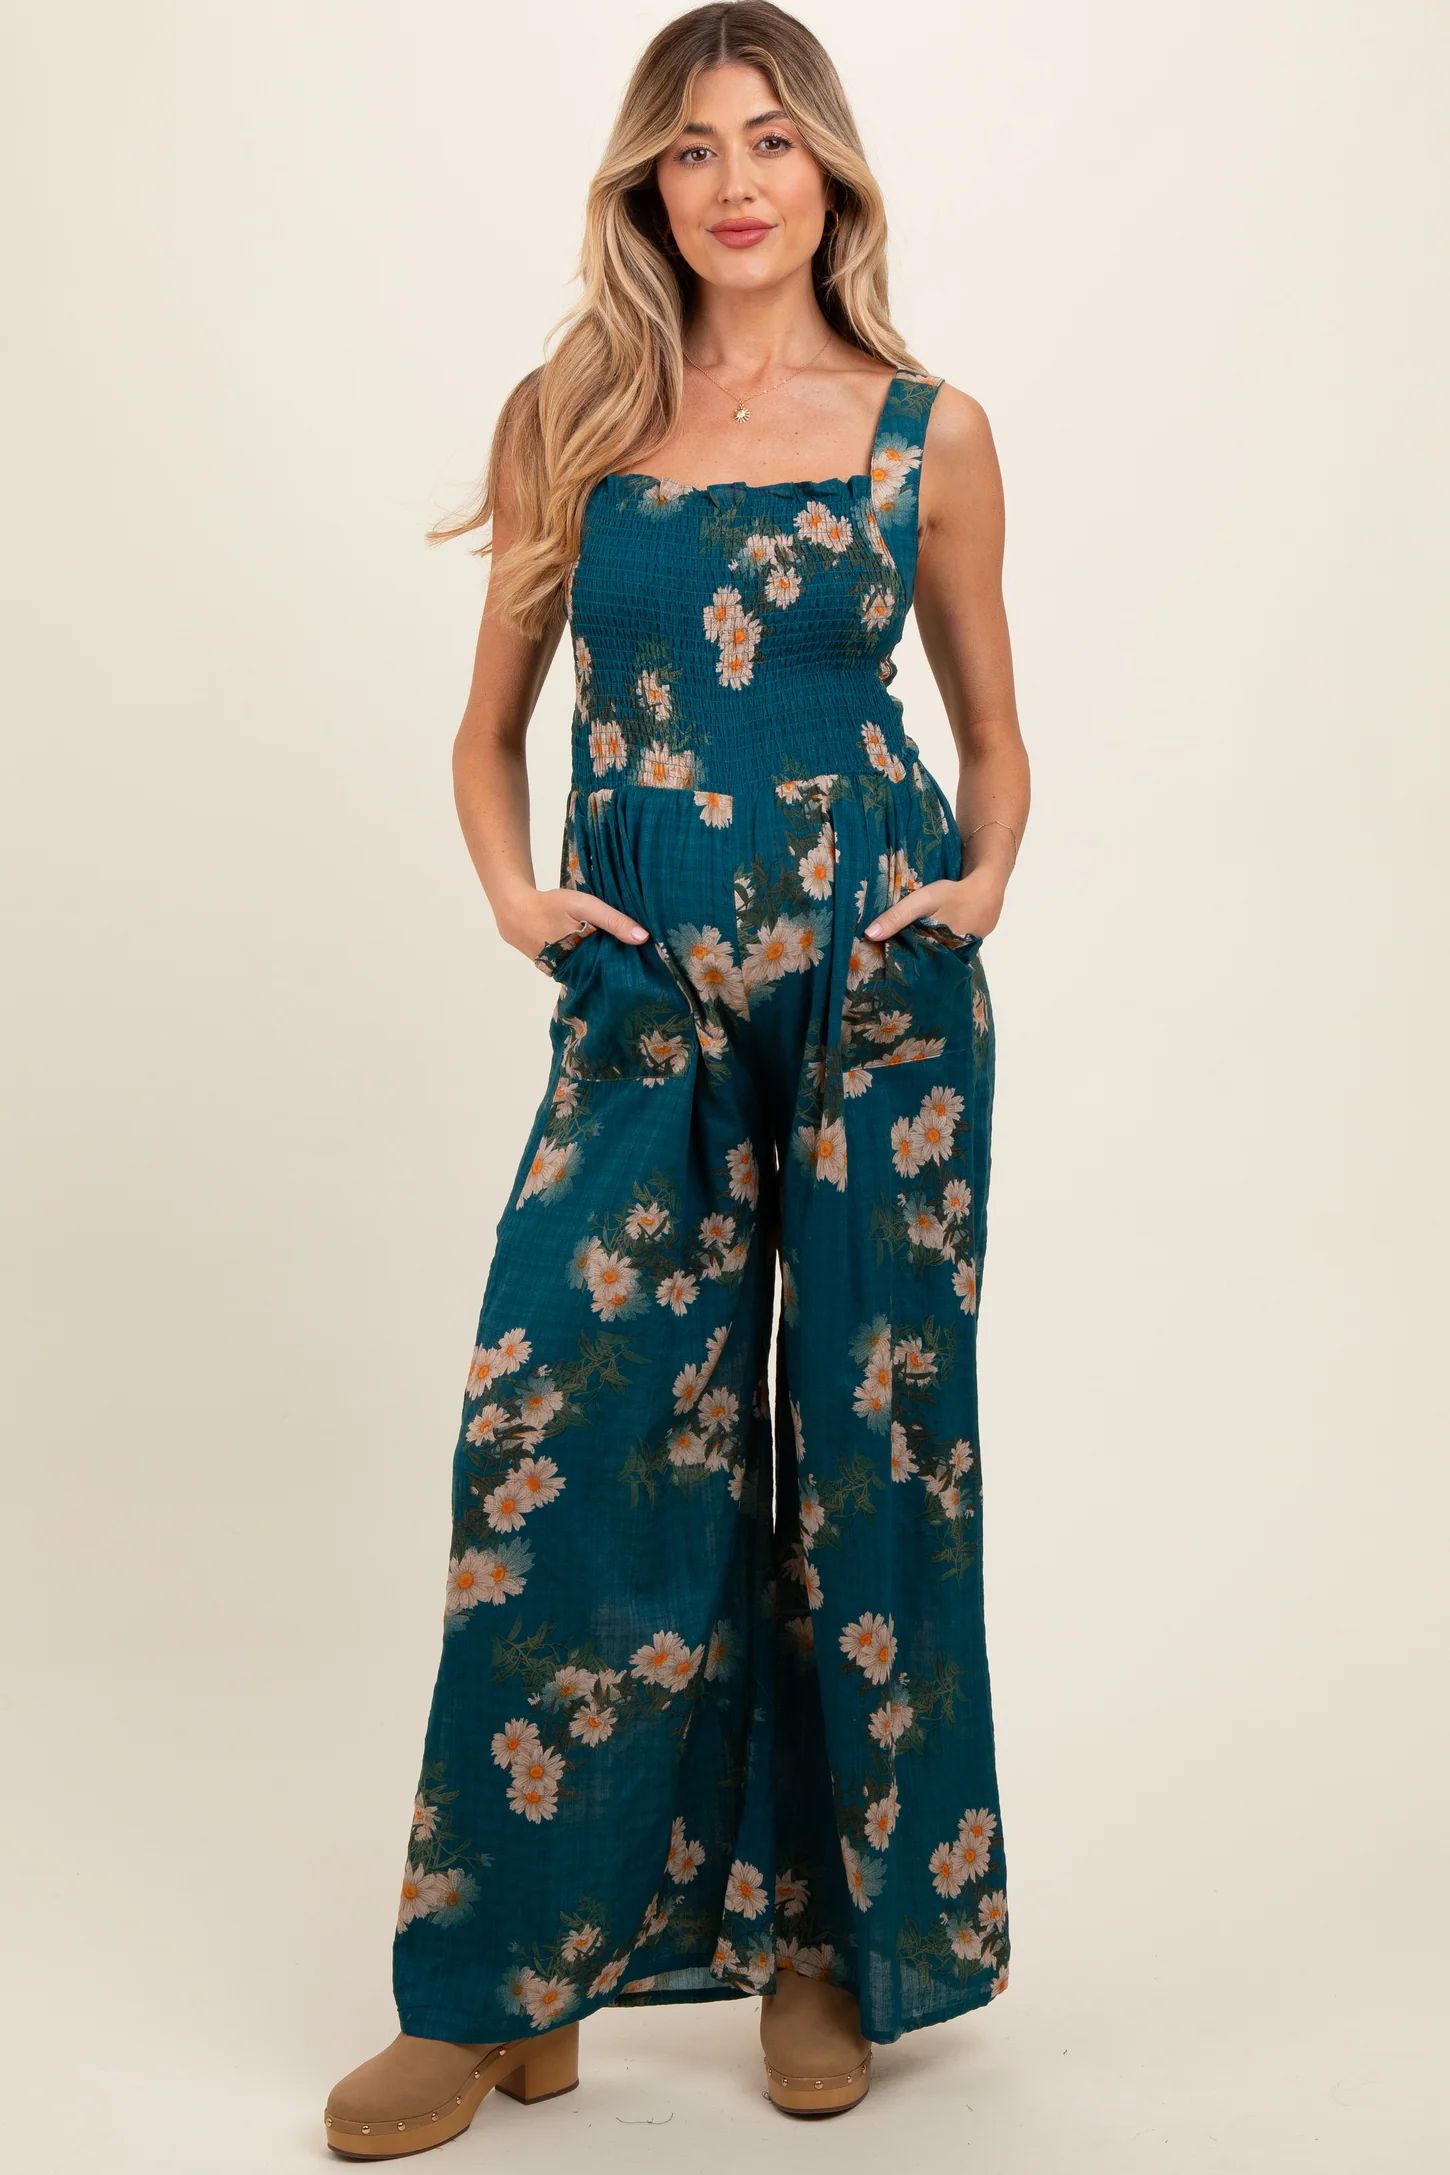 Teal Floral Smocked Maternity Jumpsuit | PinkBlush Maternity